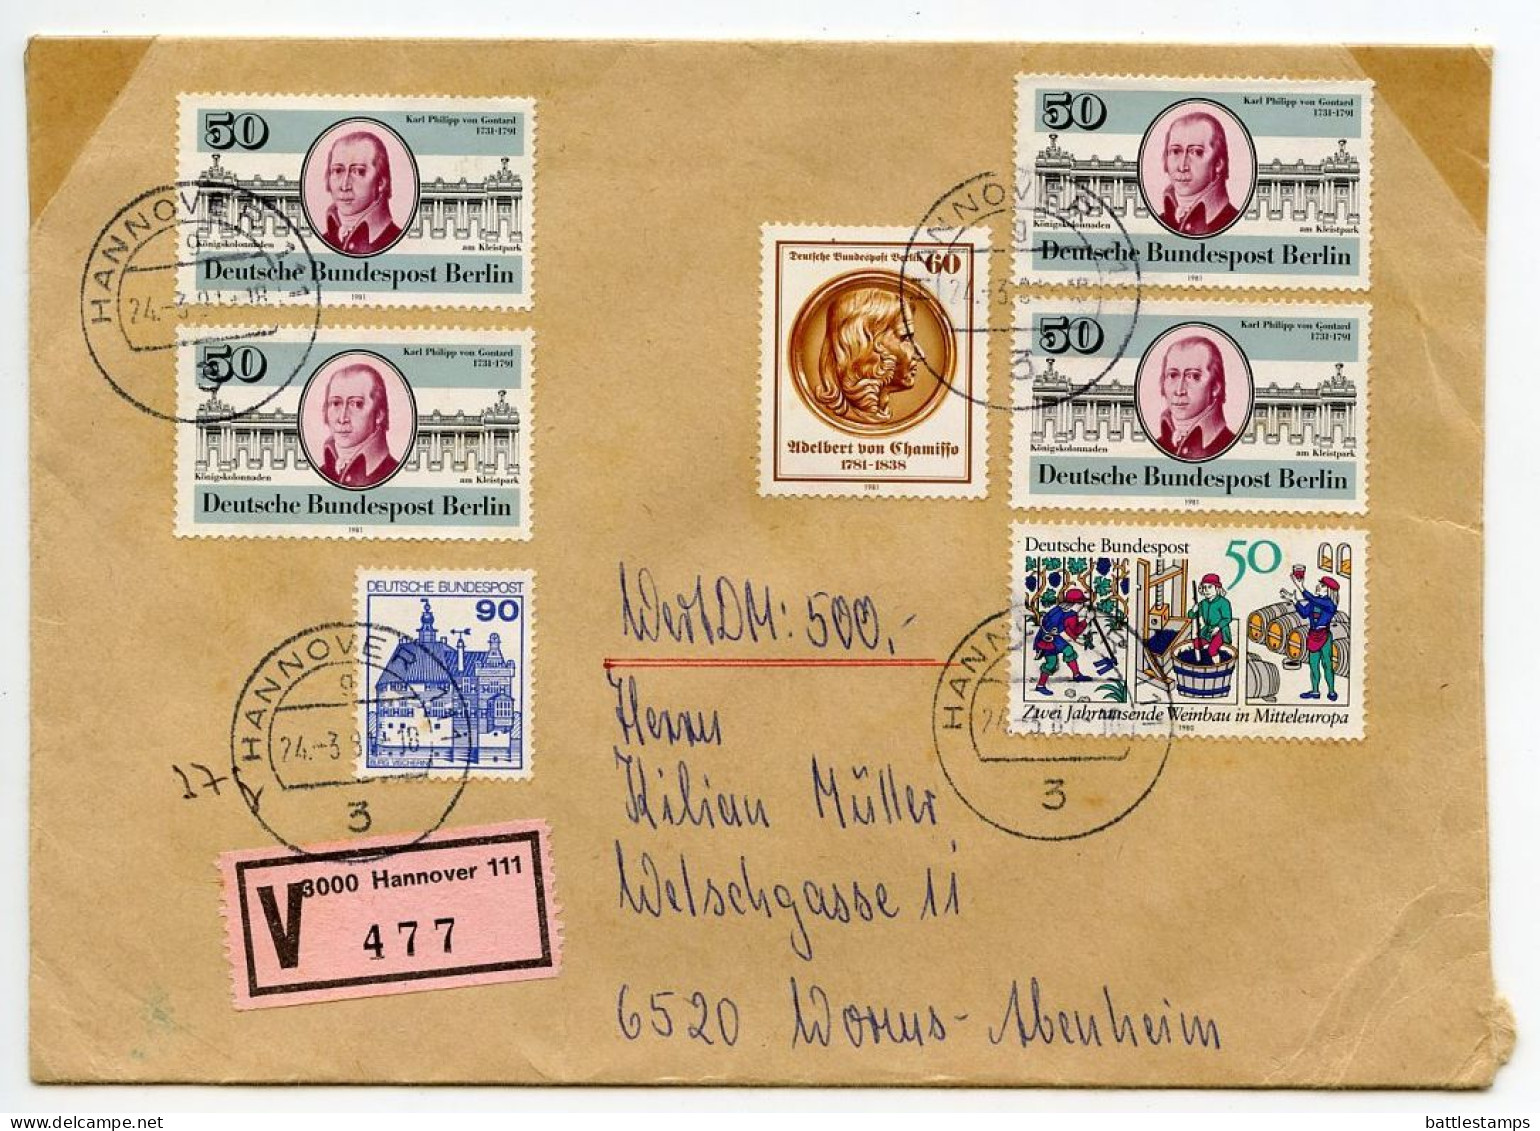 Germany, West 1981 Insured V-Label Cover; Hannover To Worms-Abenheim; Mix Of Stamps - Covers & Documents